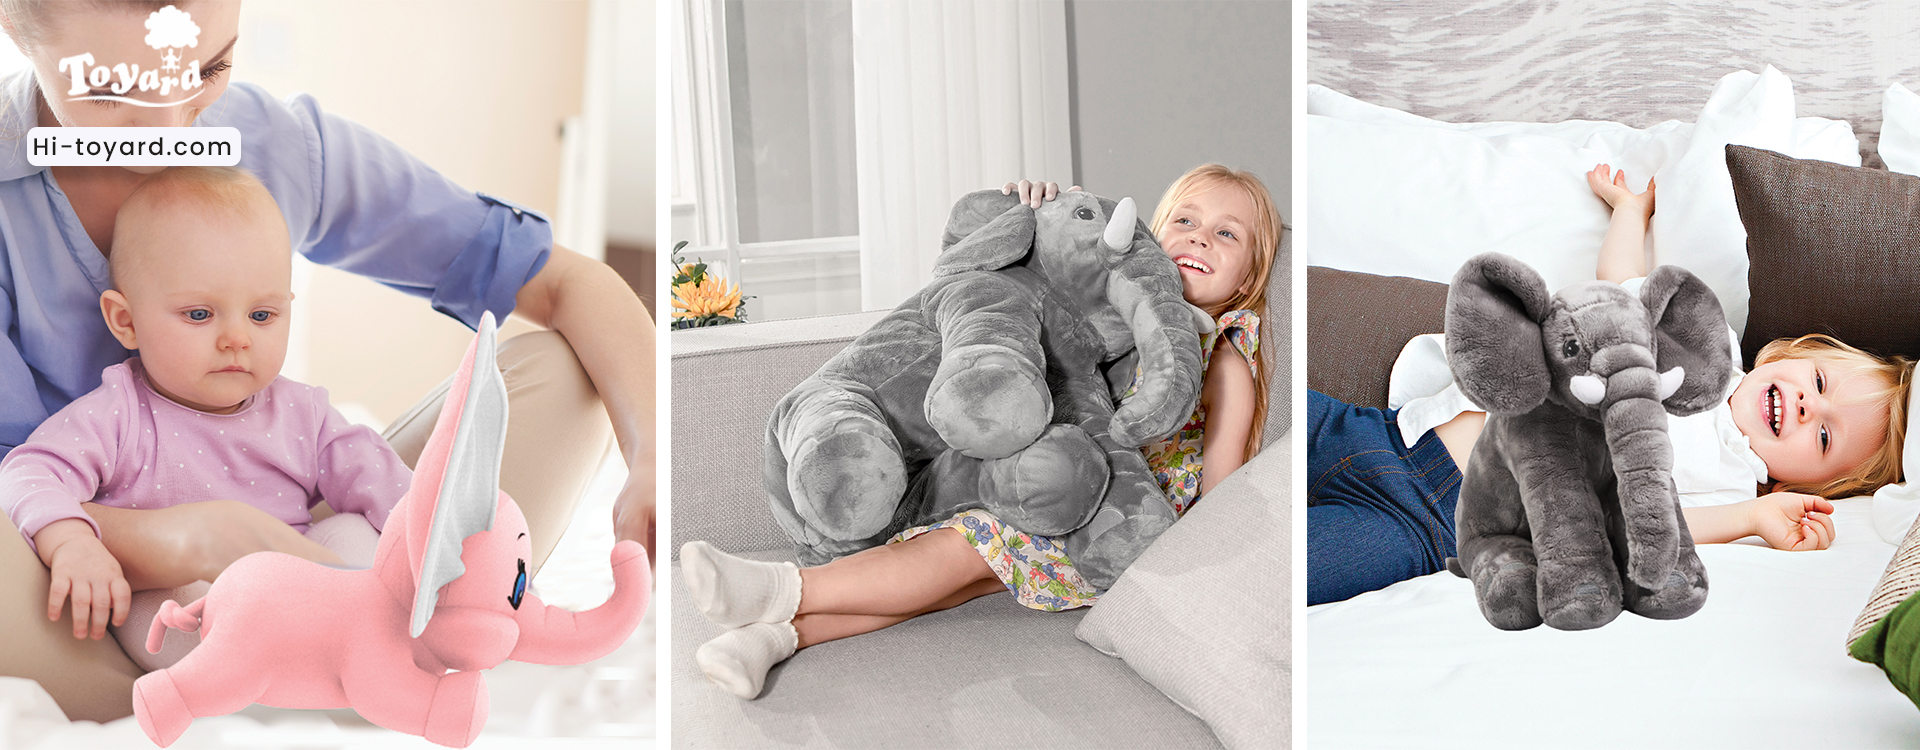 Size of personalized elephant stuffed animal for different ages childs